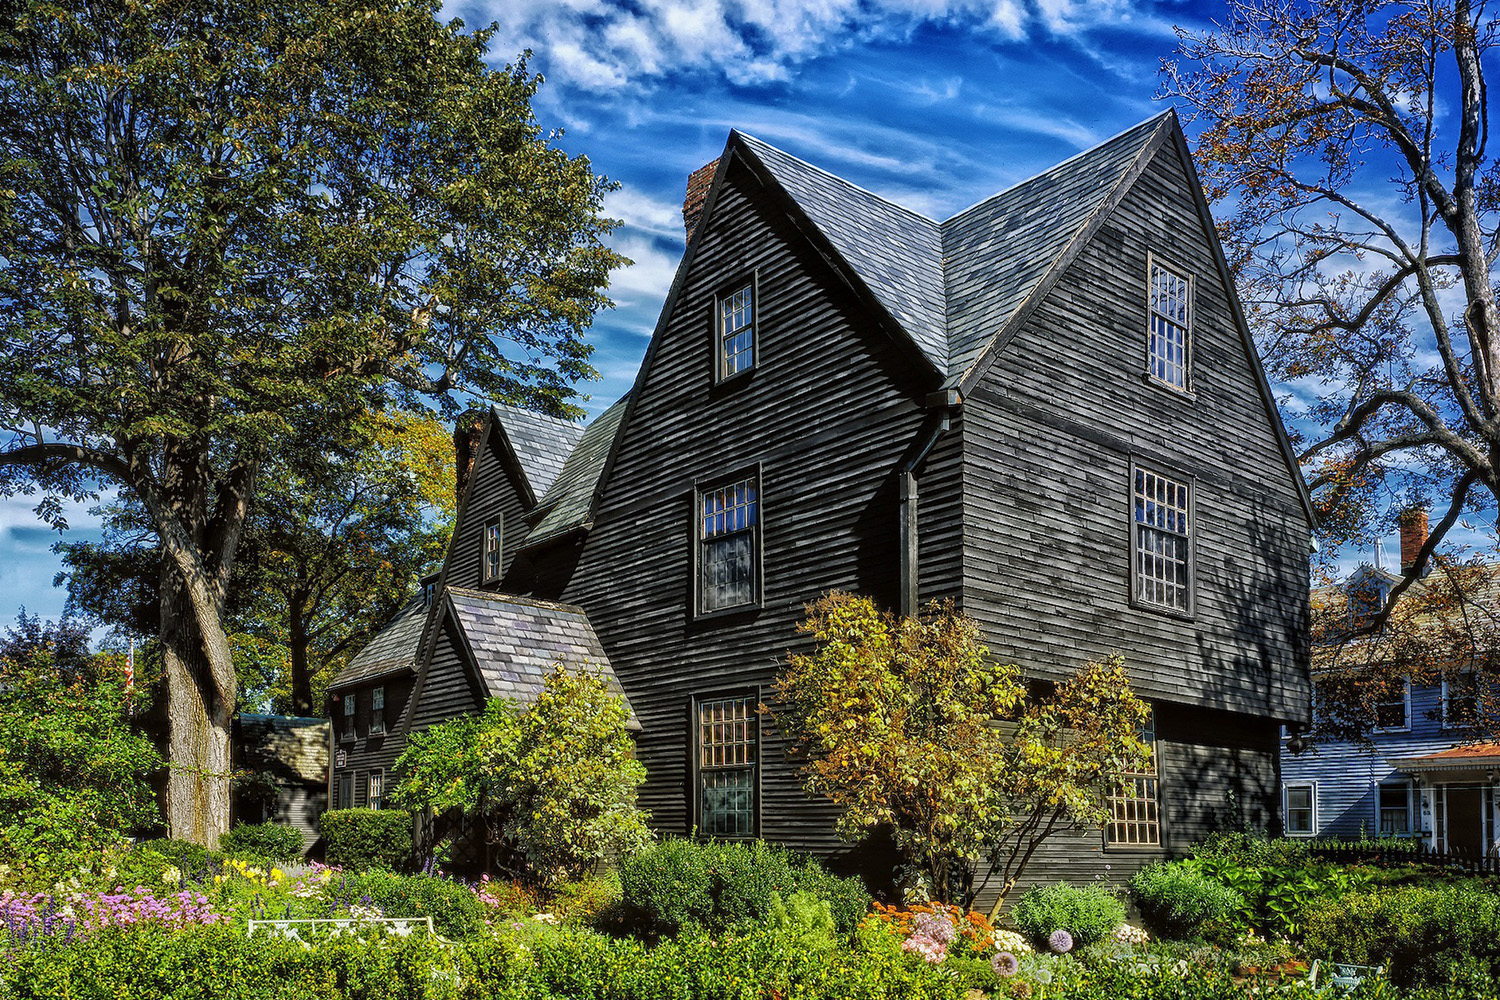 The house of Seven Gables in Salem